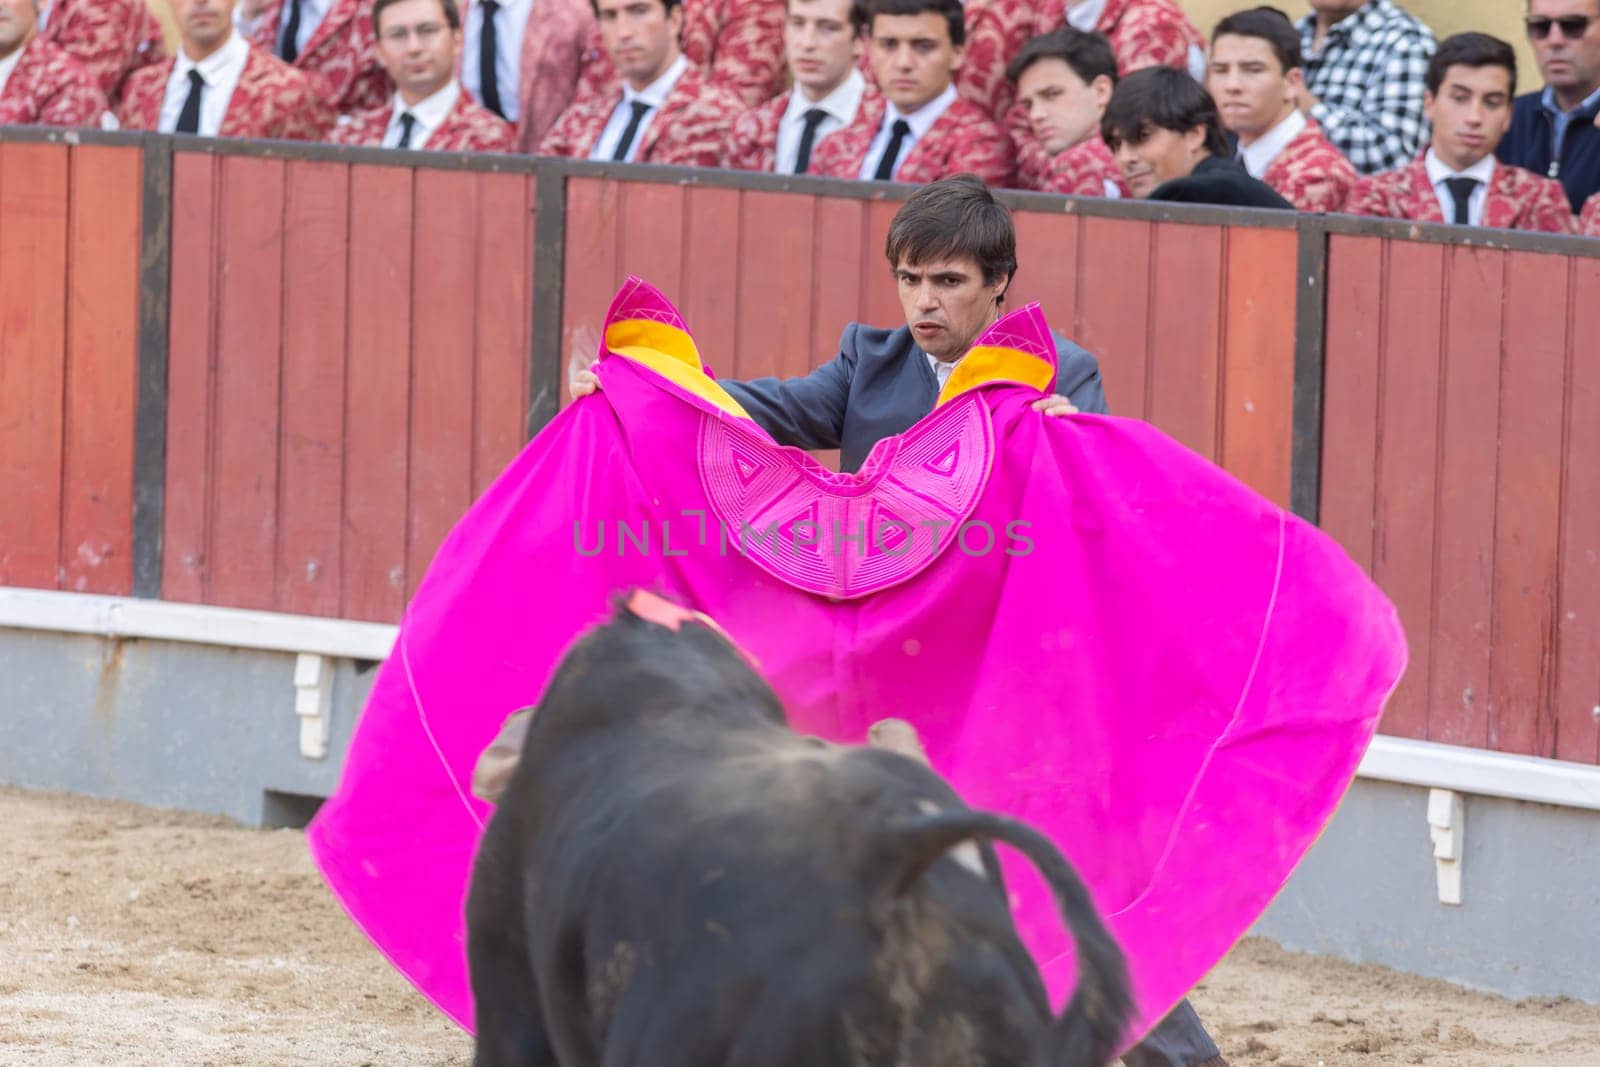 March 26, 2023 Lisbon, Portugal: Tourada - bullfighter provoking the bull with a bright rag on arena by Studia72